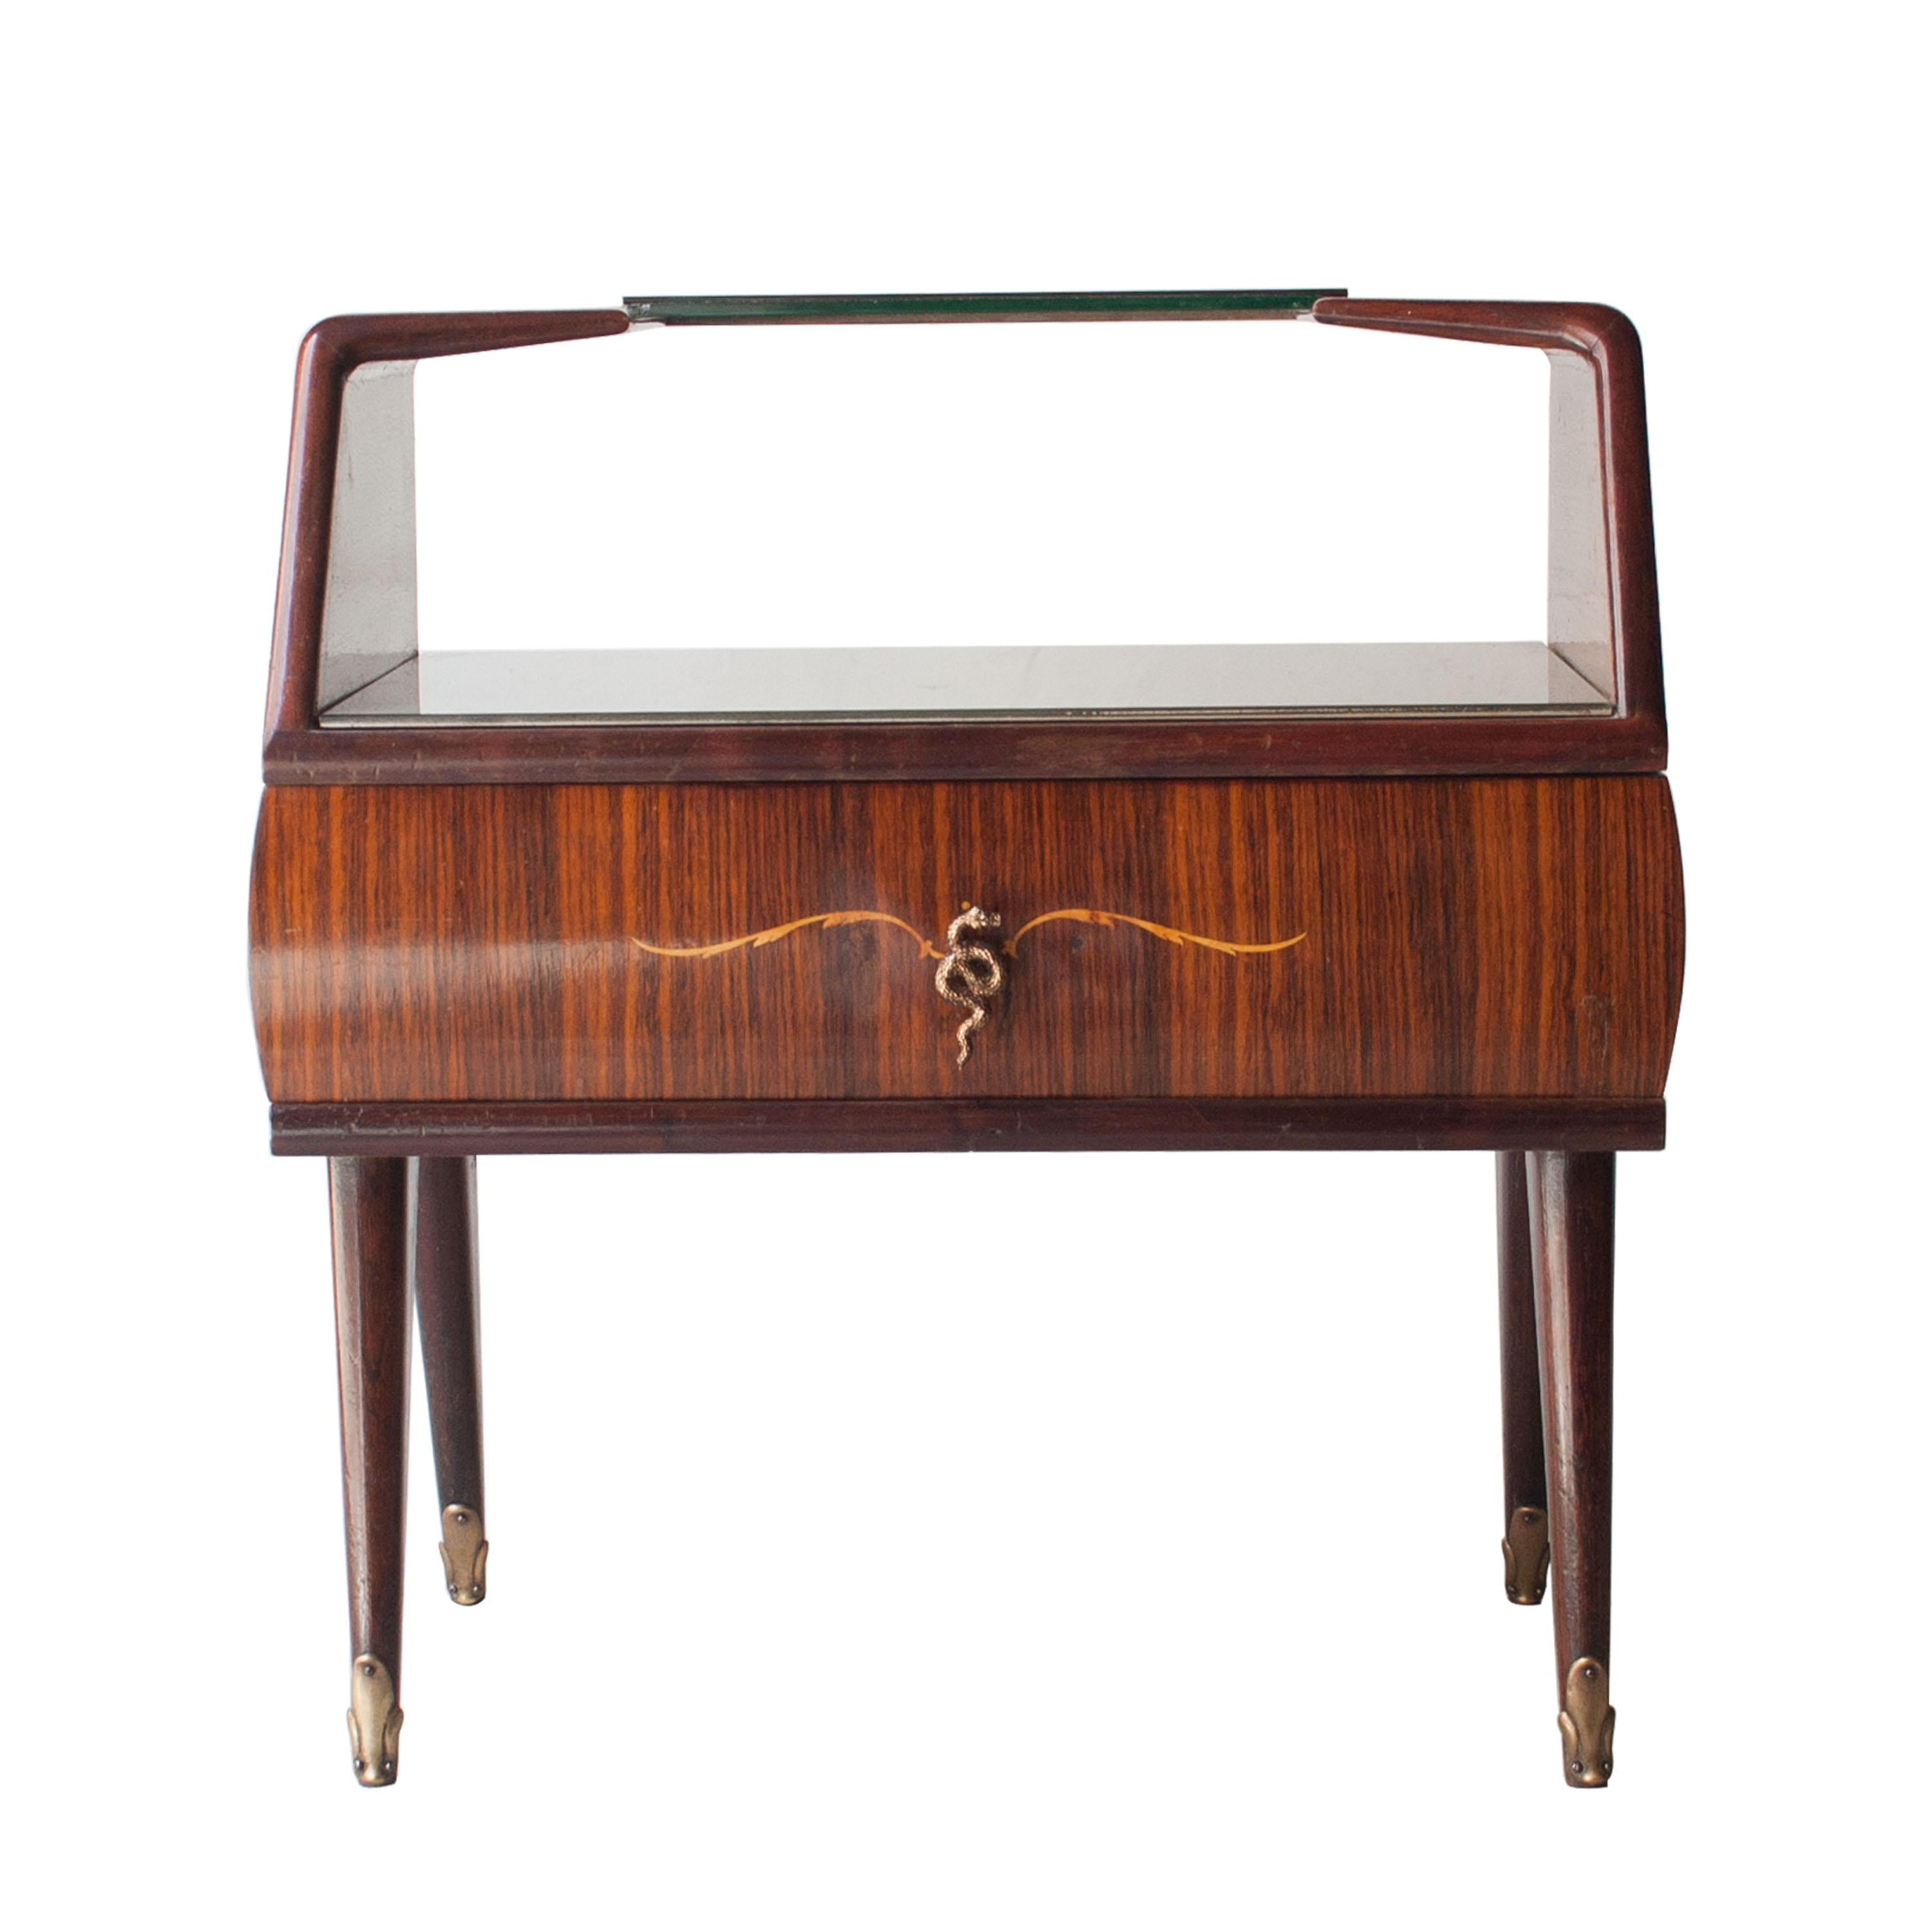 Pair of bedside tables in oak with opaline glass on the top, drawers with marquetry detail and brass handle and auxiliary shelf in curved wood and glass.